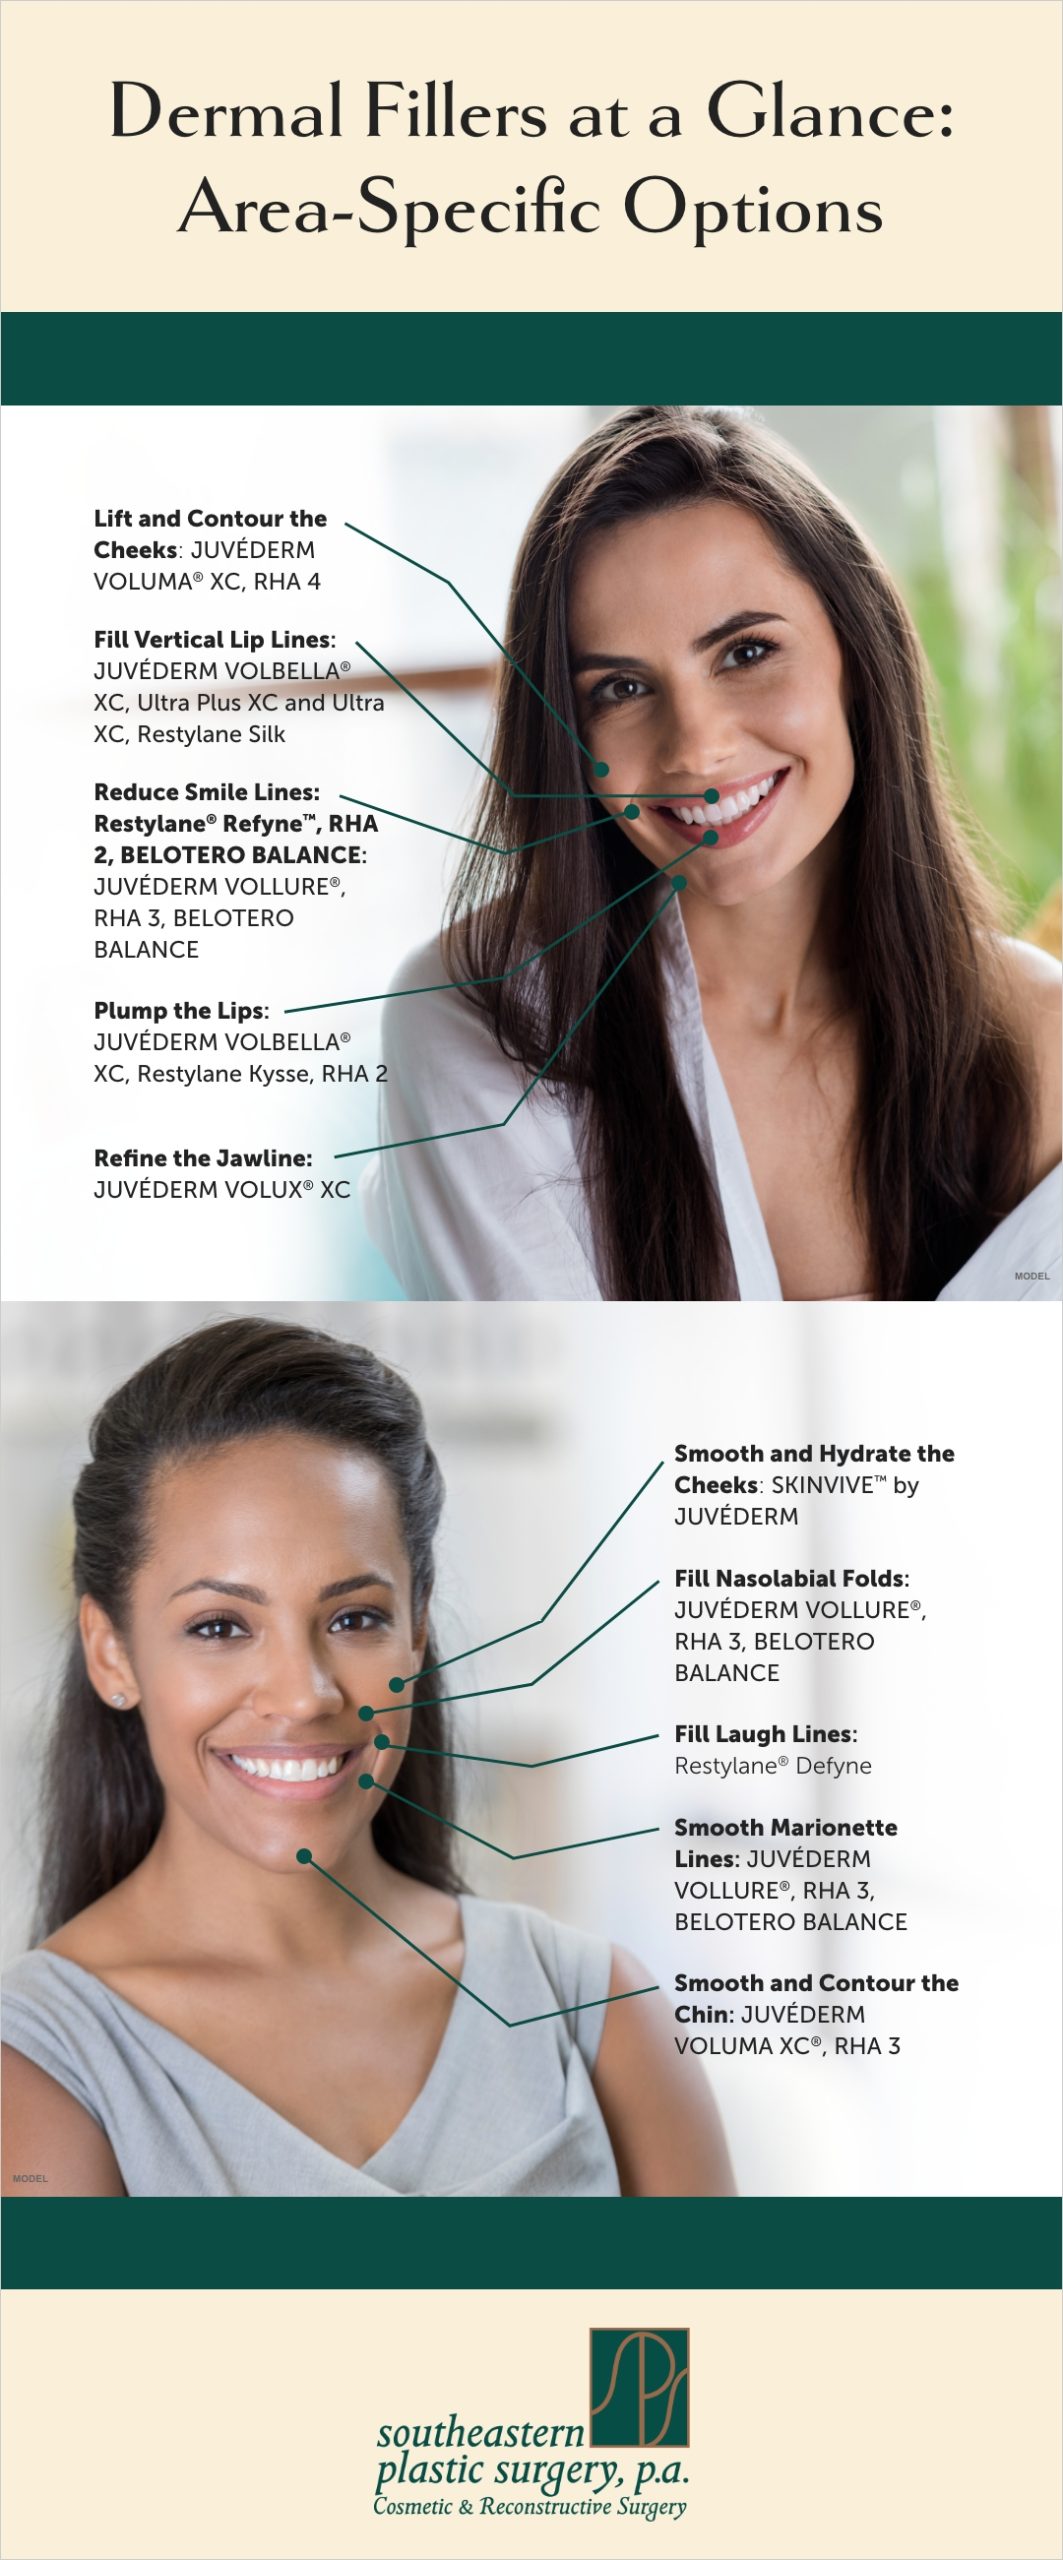 Instagraphic: Dermal fillers at a glance: Area-Specific Options.